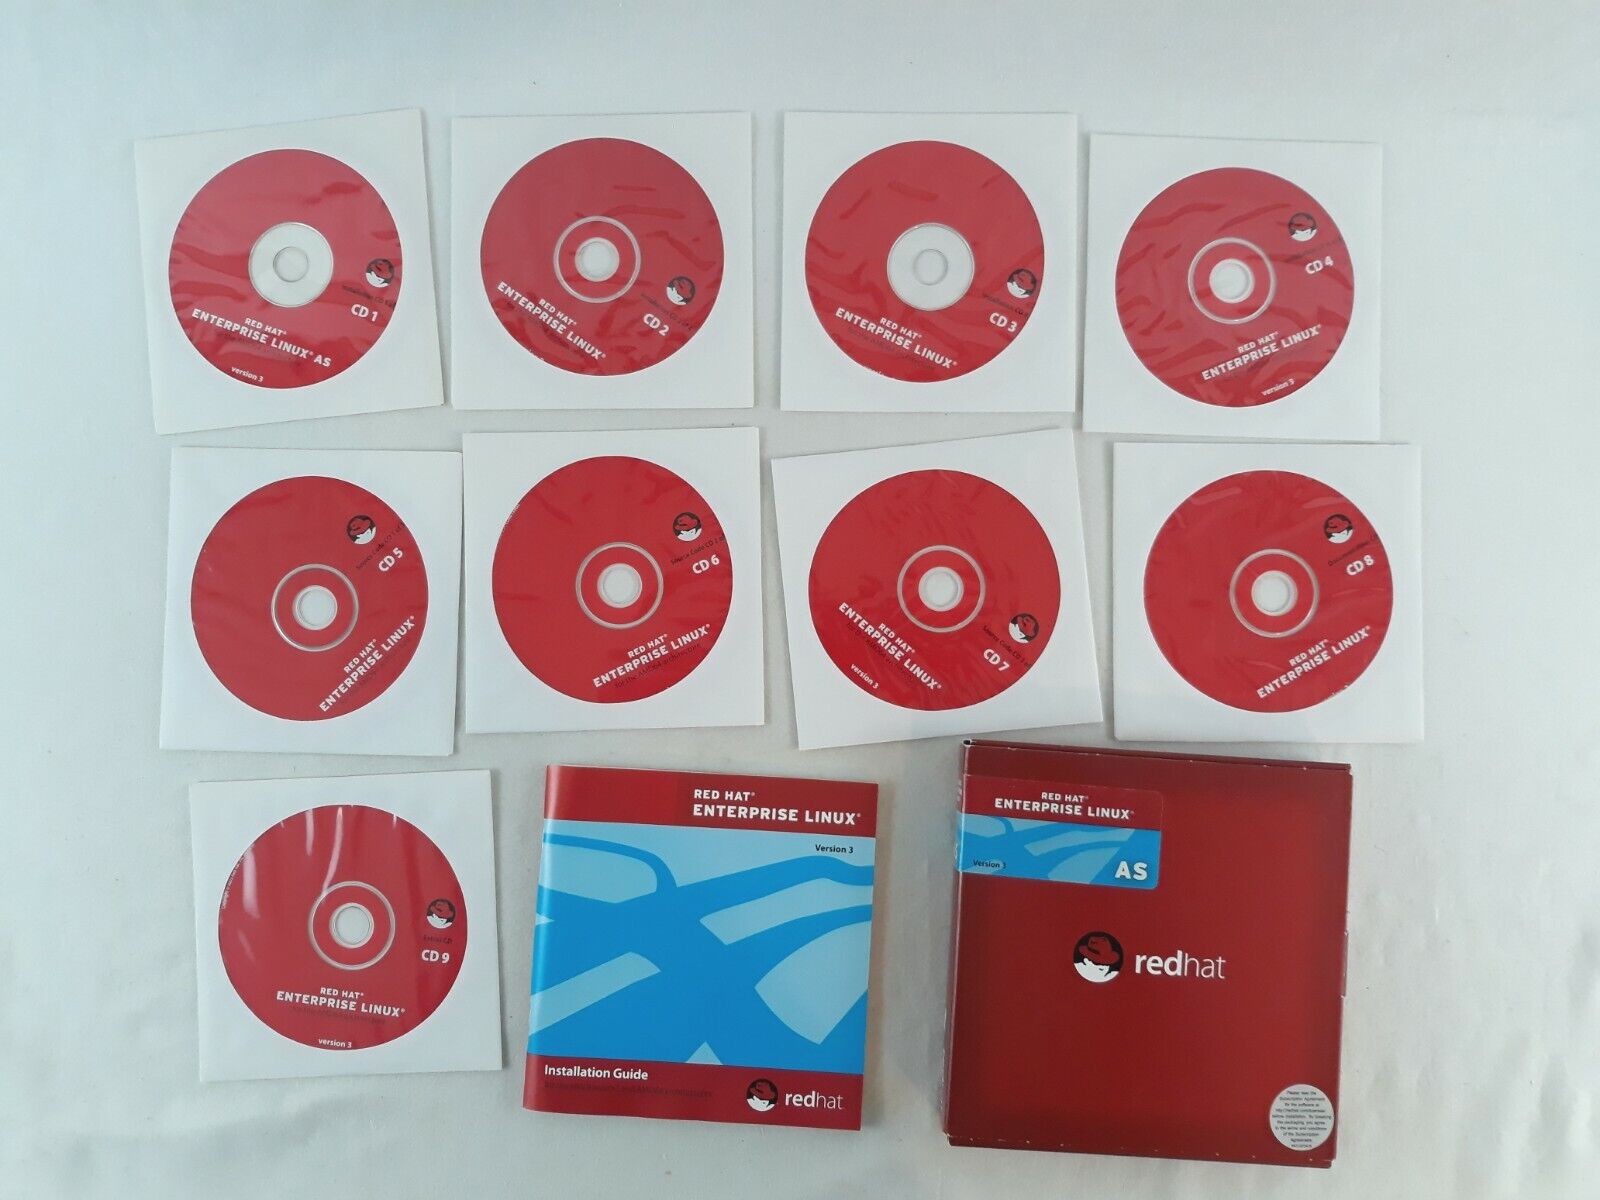 Red Hat Enterprise Linux AS Version 3 For AMD64 Architecture 9 CDs